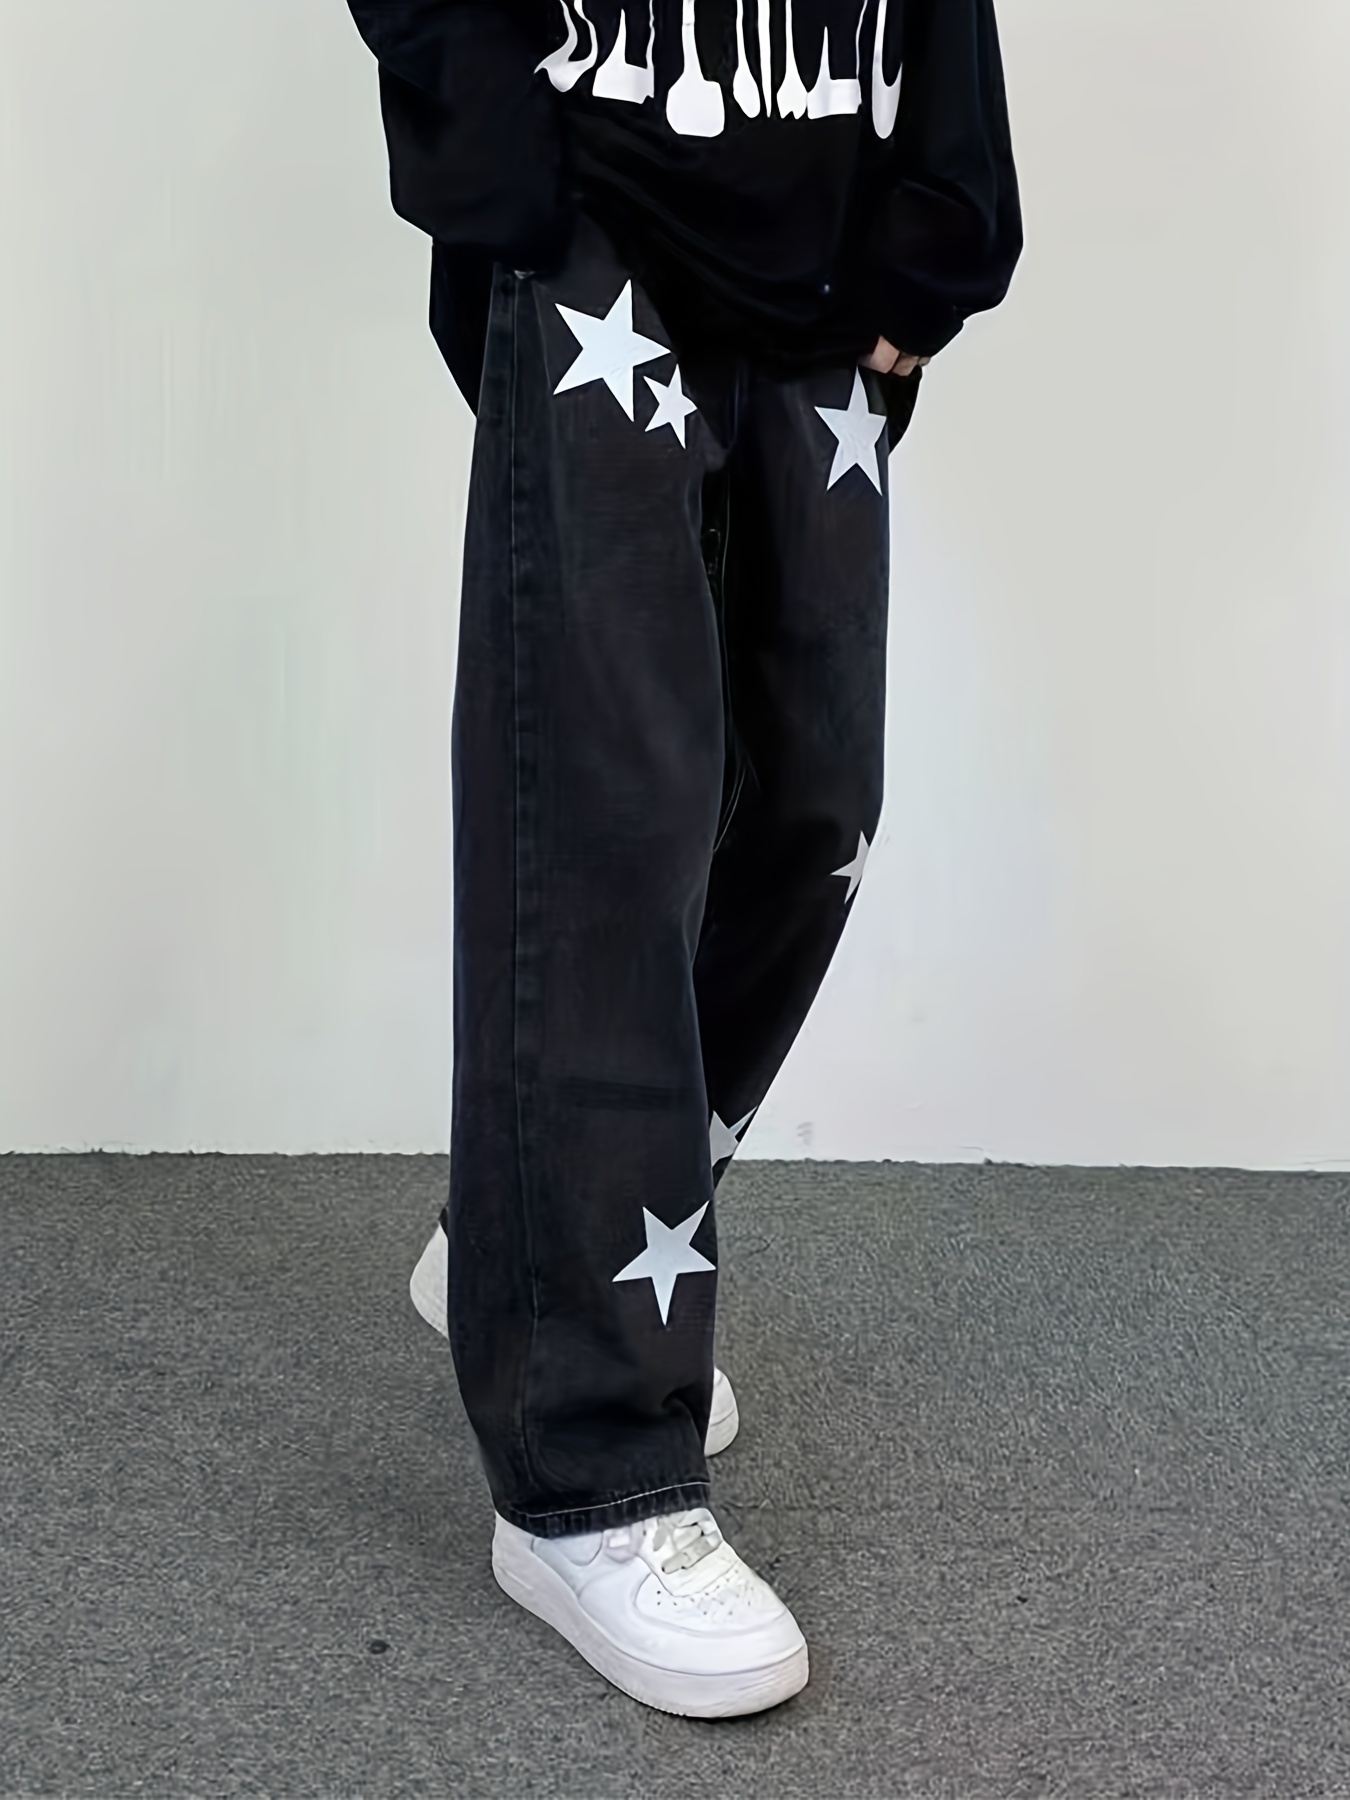 Star Print Patch Pockets Y2k Baggy Jeans Black Loose Casual